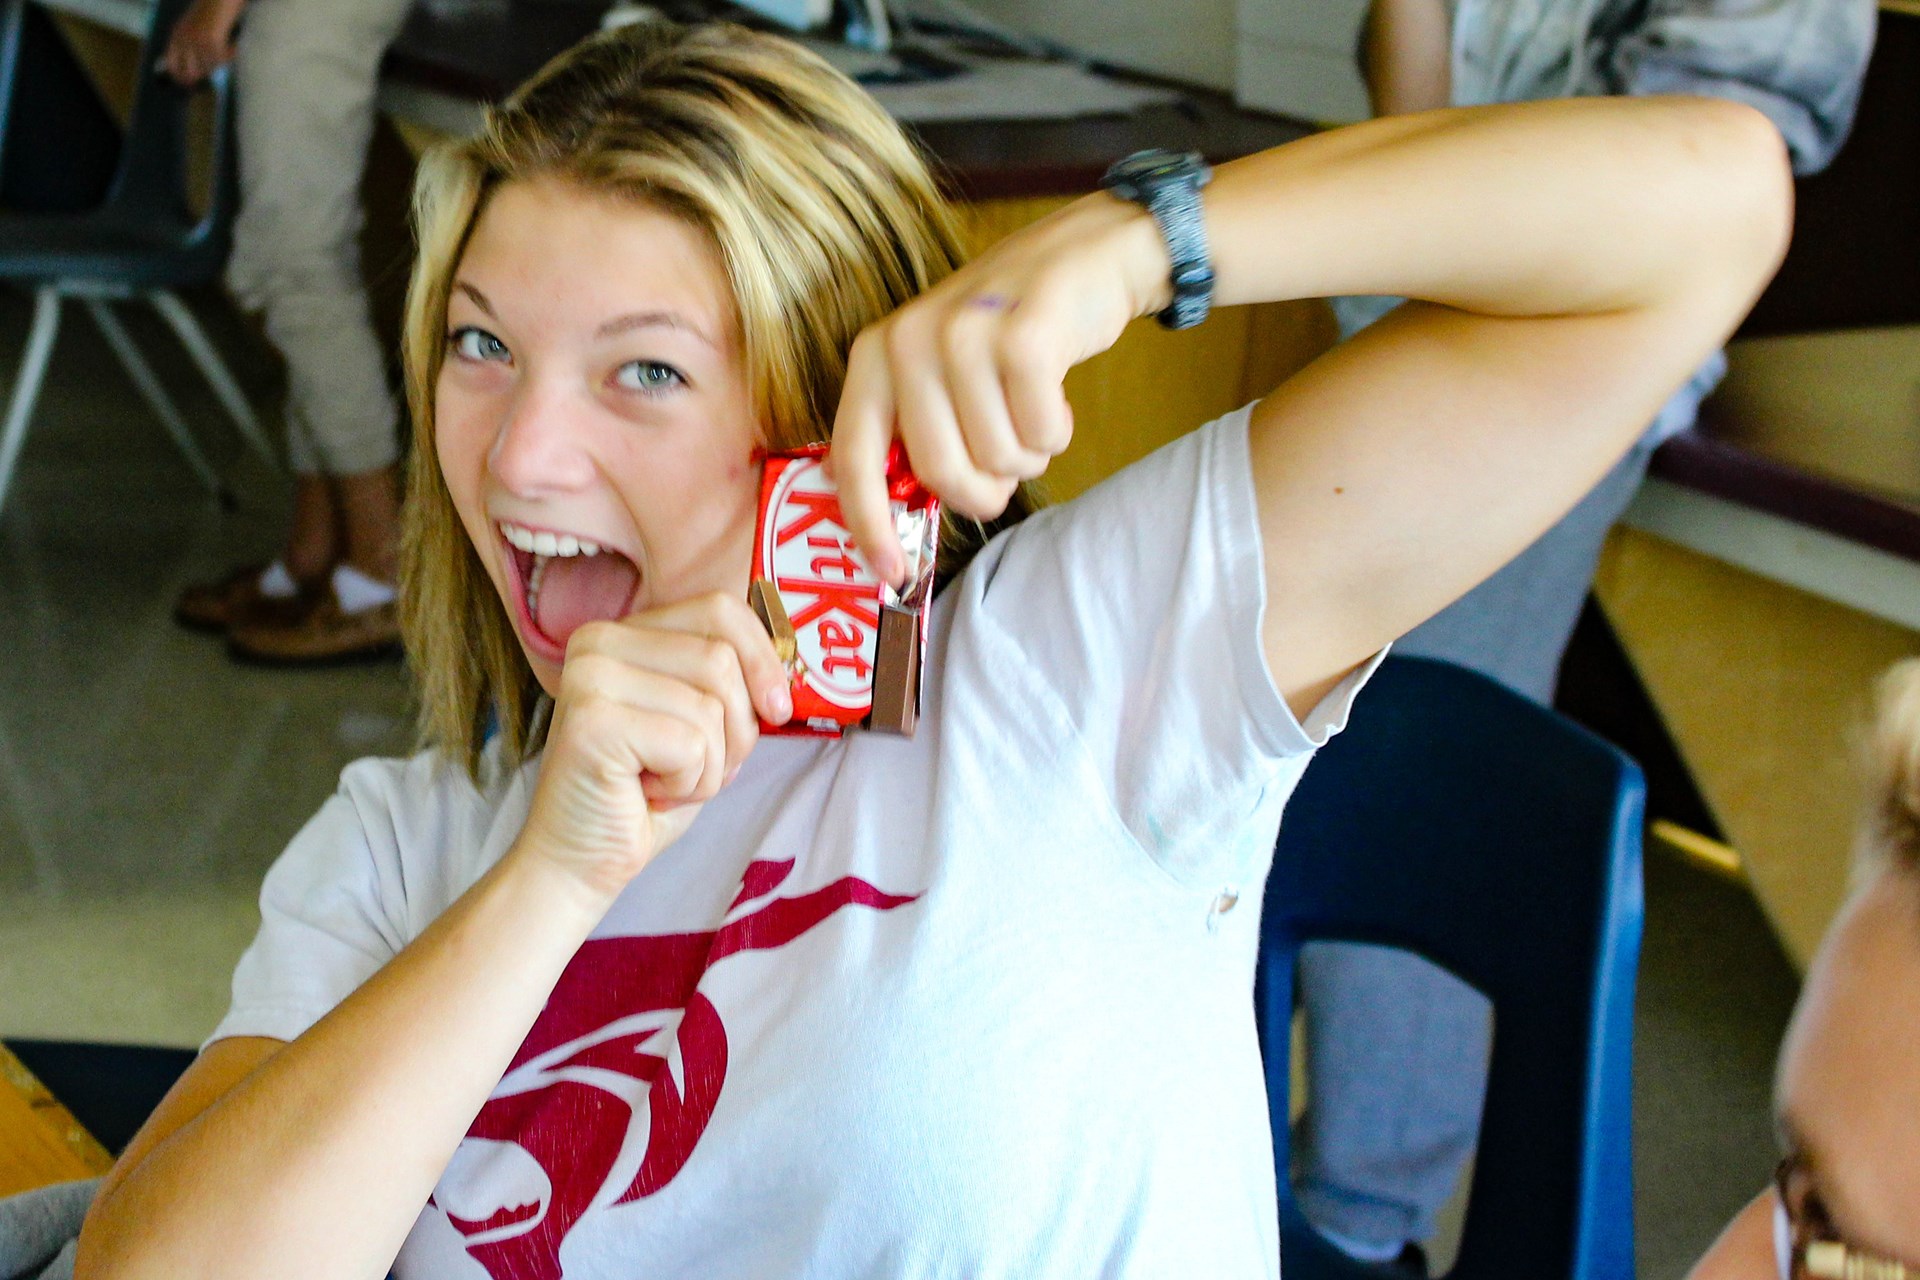 Student showing off KitKat.